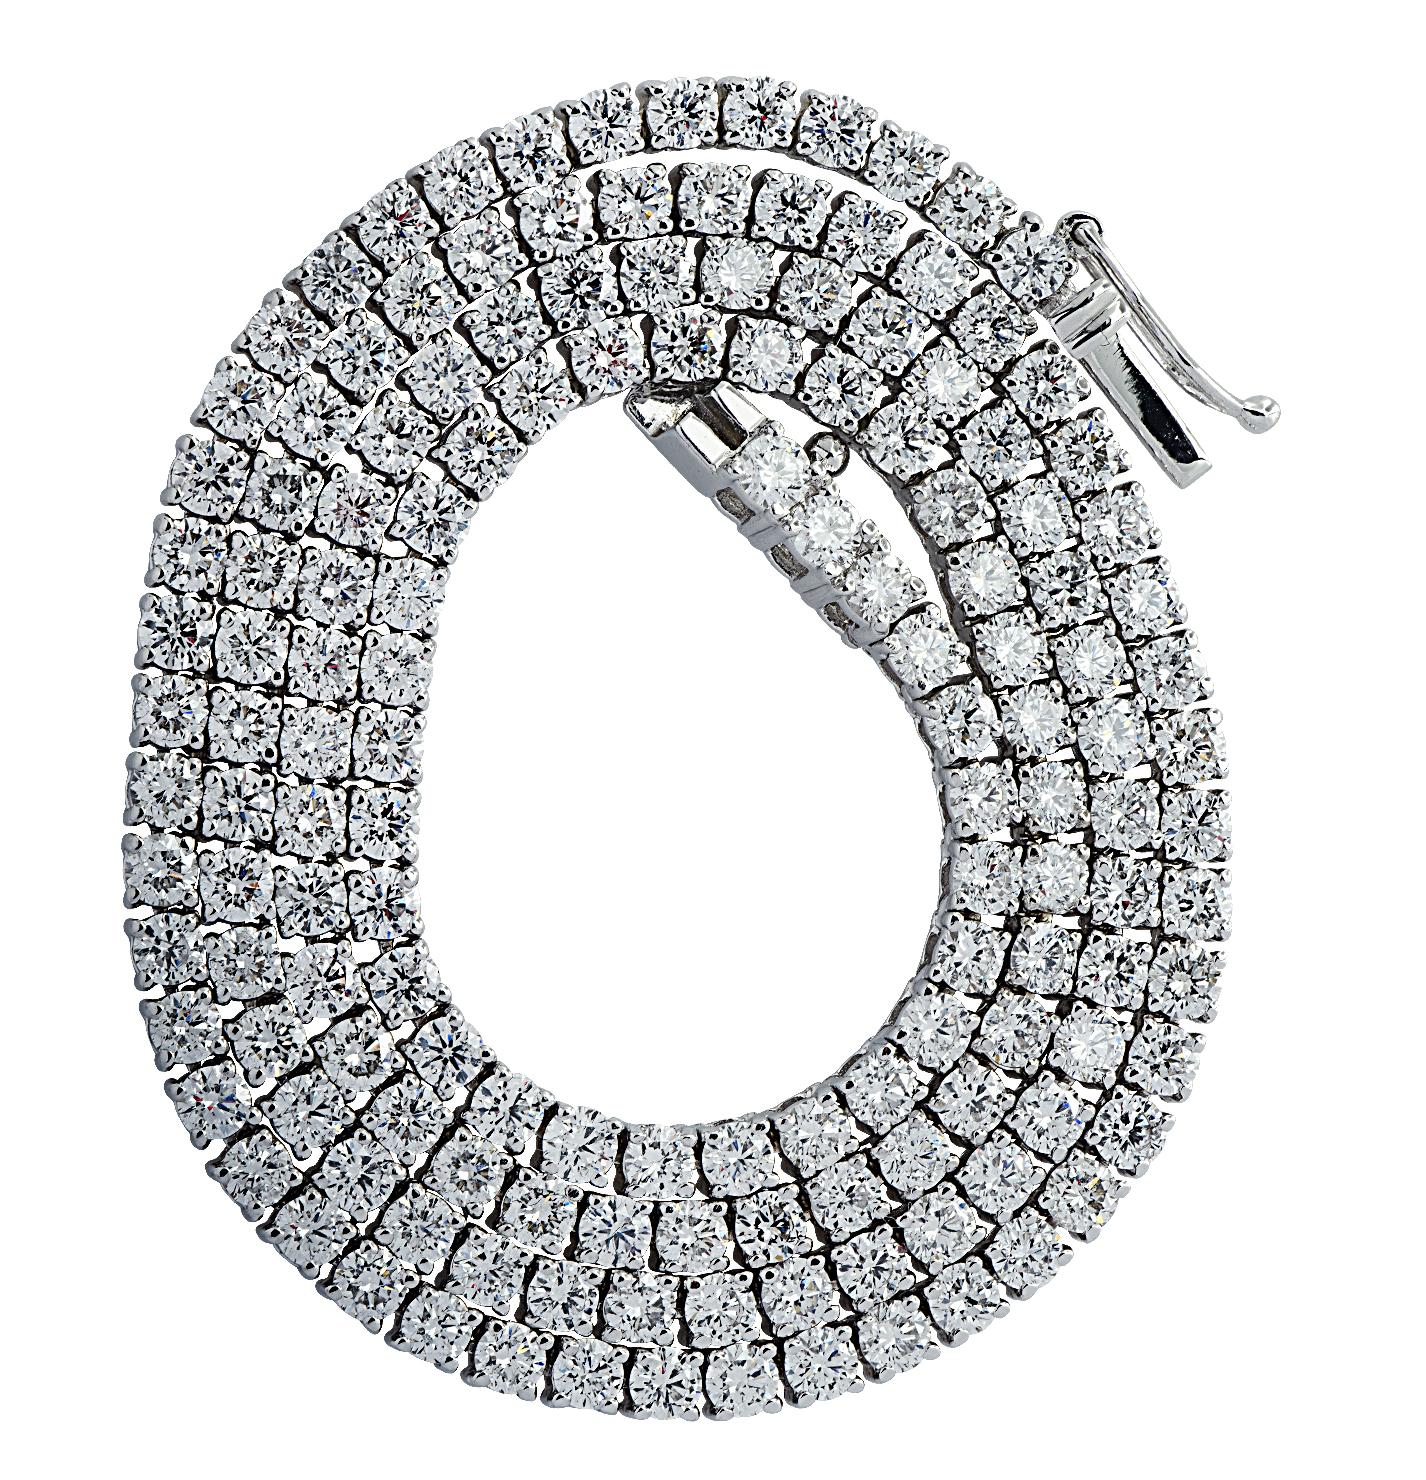 Exquisite Vivid Diamonds Straight Line diamond tennis necklace crafted in 18 karat white gold, showcasing 150 round brilliant cut diamonds weighing 9.83 carats total, D-F color, VS clarity. Each diamond was carefully selected, perfectly matched and